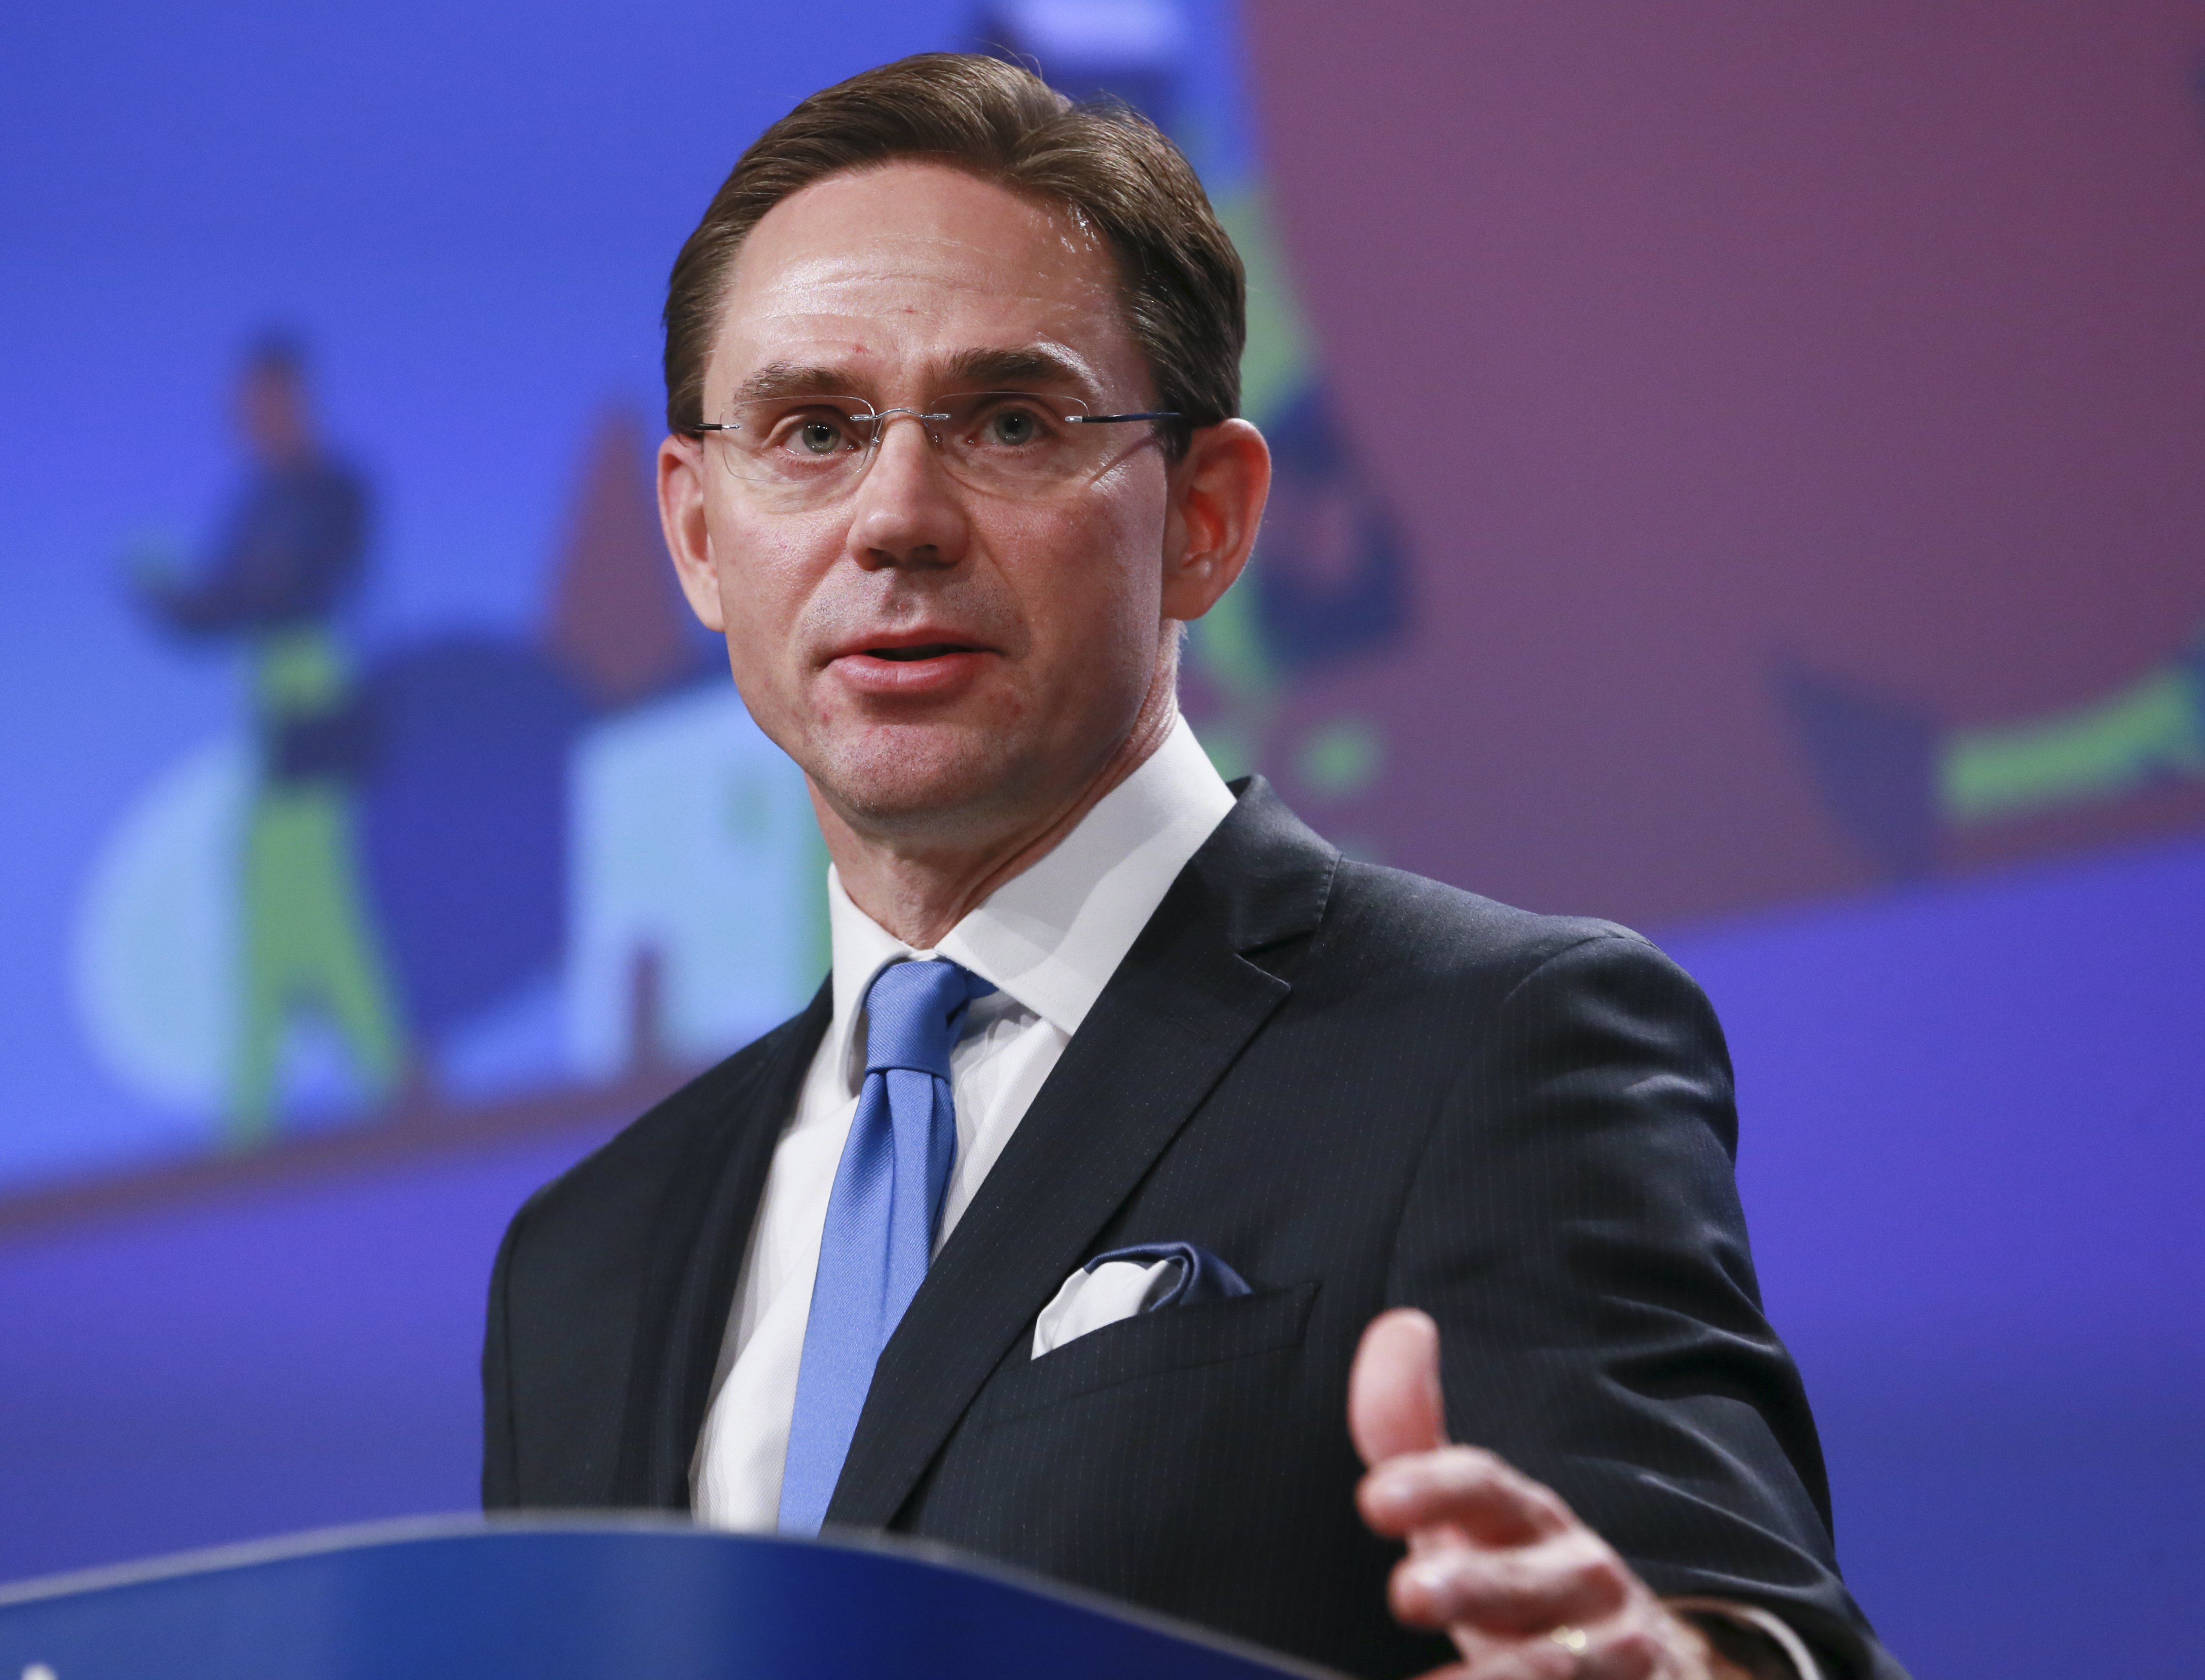 2017-11-29 08:16:42 epa06357264 European commissioner in charge of jobs, growth, investment and competitiveness Jyrki Katainen during a press conference on intellectual property in Brussels, Belgium, 29 November 2017. The Commission today presents measures to ensure that intellectual property rights (IPR) are well protected, thereby encouraging European companies to invest in innovation and creativity.  EPA/OLIVIER HOSLET